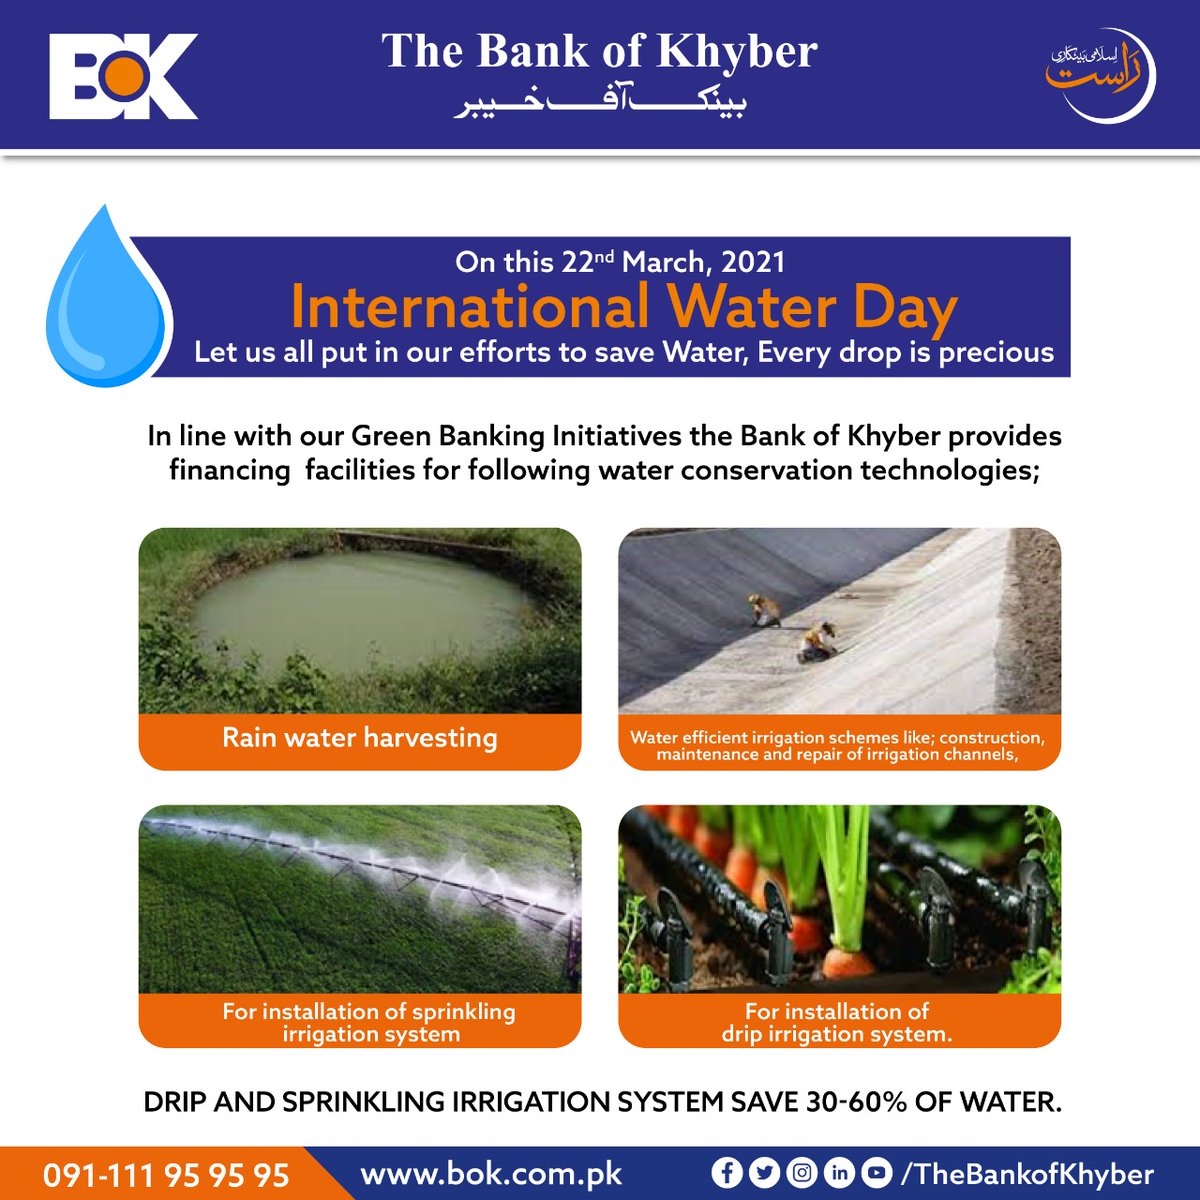 In Line with our Green Banking Initiatives the Bank Of Khyber provides financing facilities for following water conservation technologies.

#BOK #bankofkhyber #internationalwaterday #greenbanking